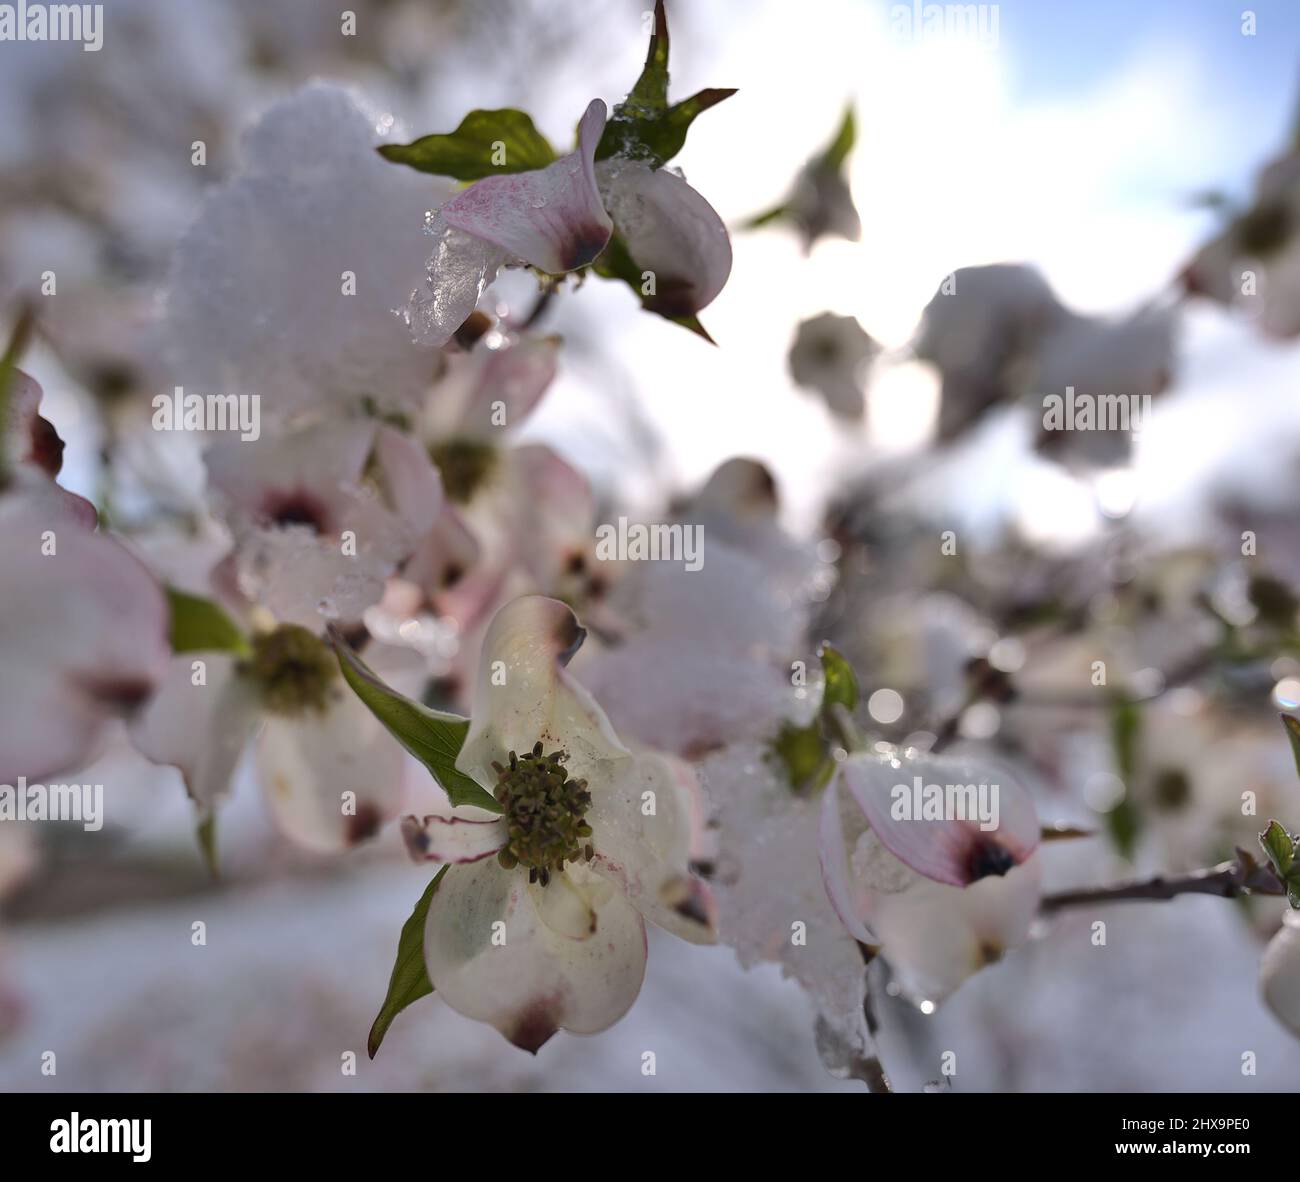 A macro image of a dog wood tree that has bloomed and been covered by snow in a late season snow storm with clearing skies in the background. Stock Photo